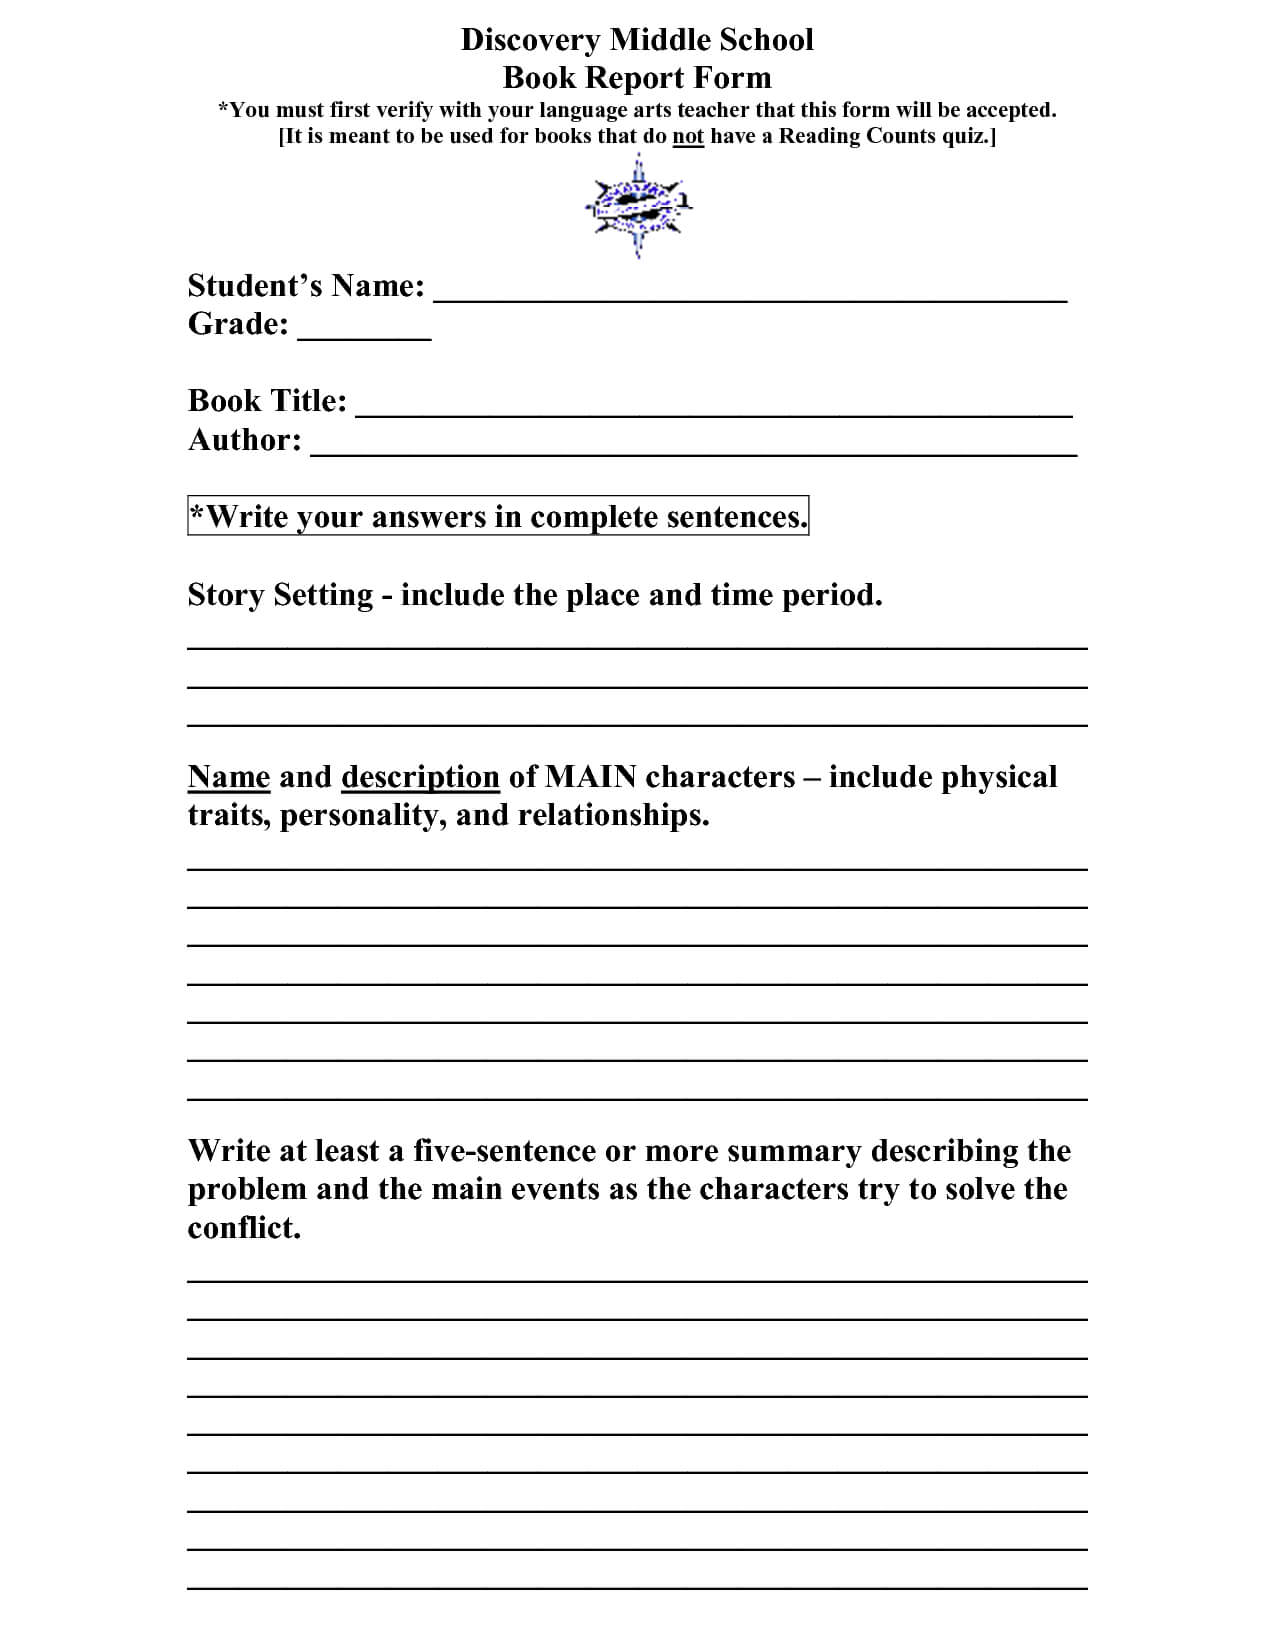 Scope Of Work Template | Book Report Templates, High School Throughout Middle School Book Report Template